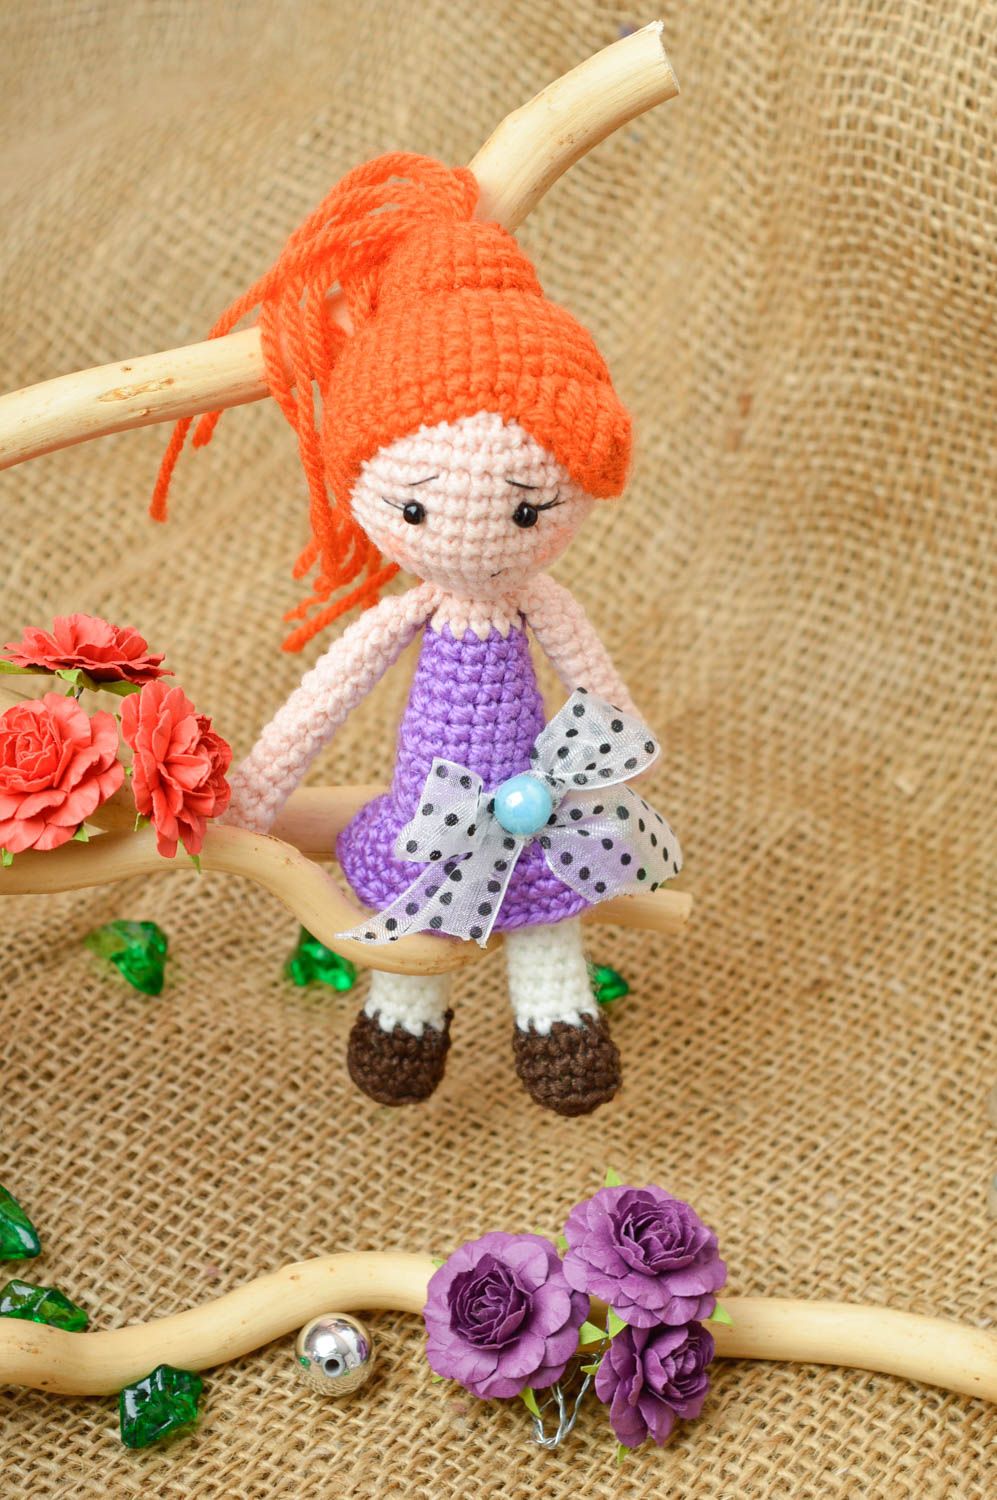 Baby doll handmade crocheted toy for children stuffed toys hand-crocheted toys photo 1